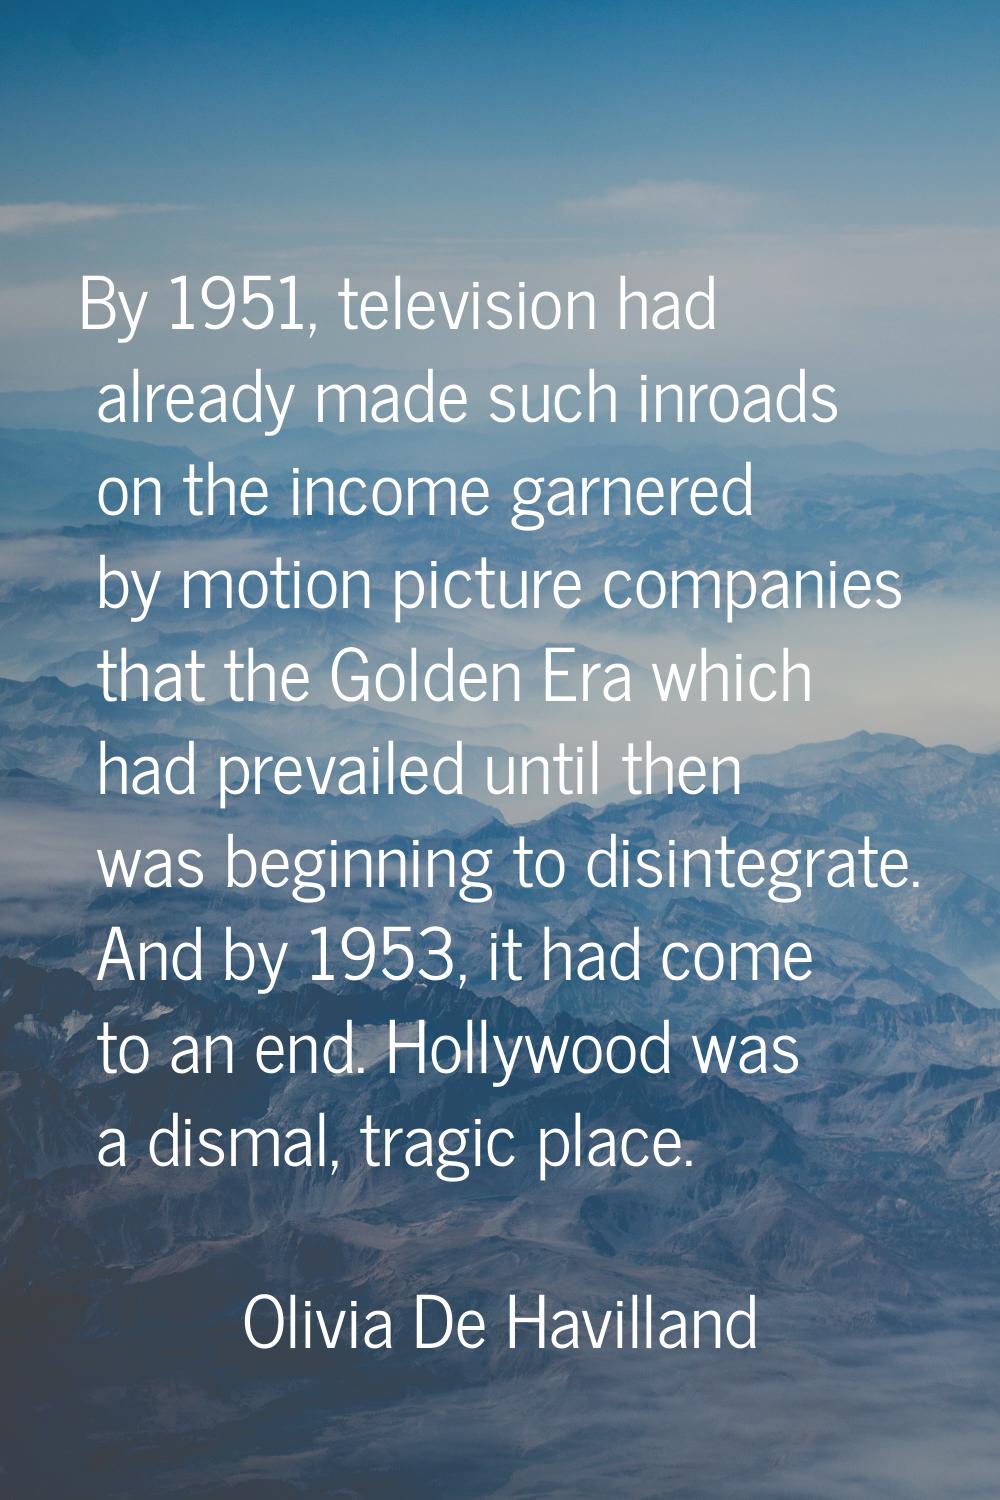 By 1951, television had already made such inroads on the income garnered by motion picture companie